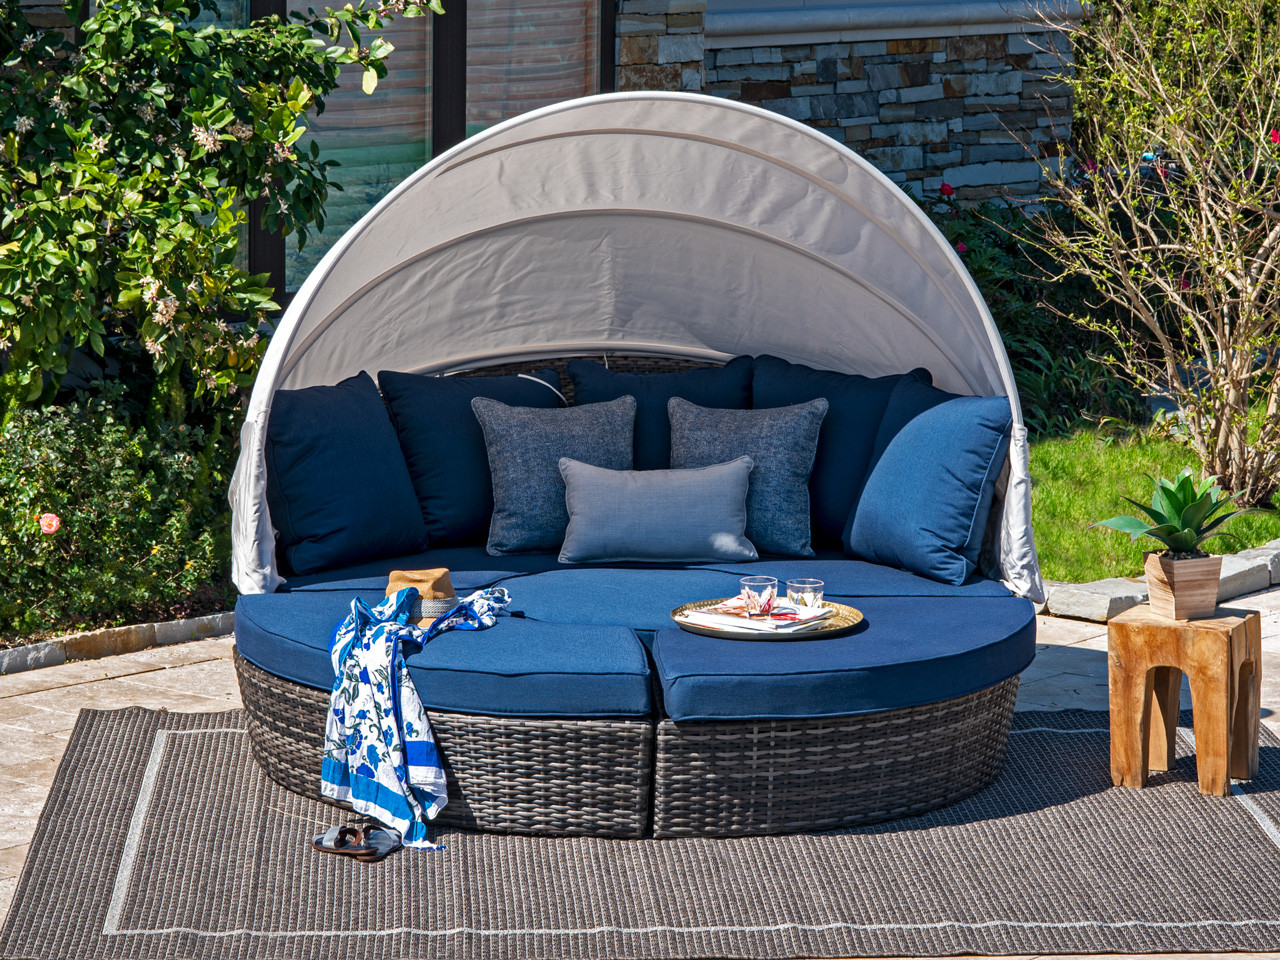 Contempo Husk Outdoor Wicker and Spectrum Indigo Cushion 4 Pc. Daybed with Canopy